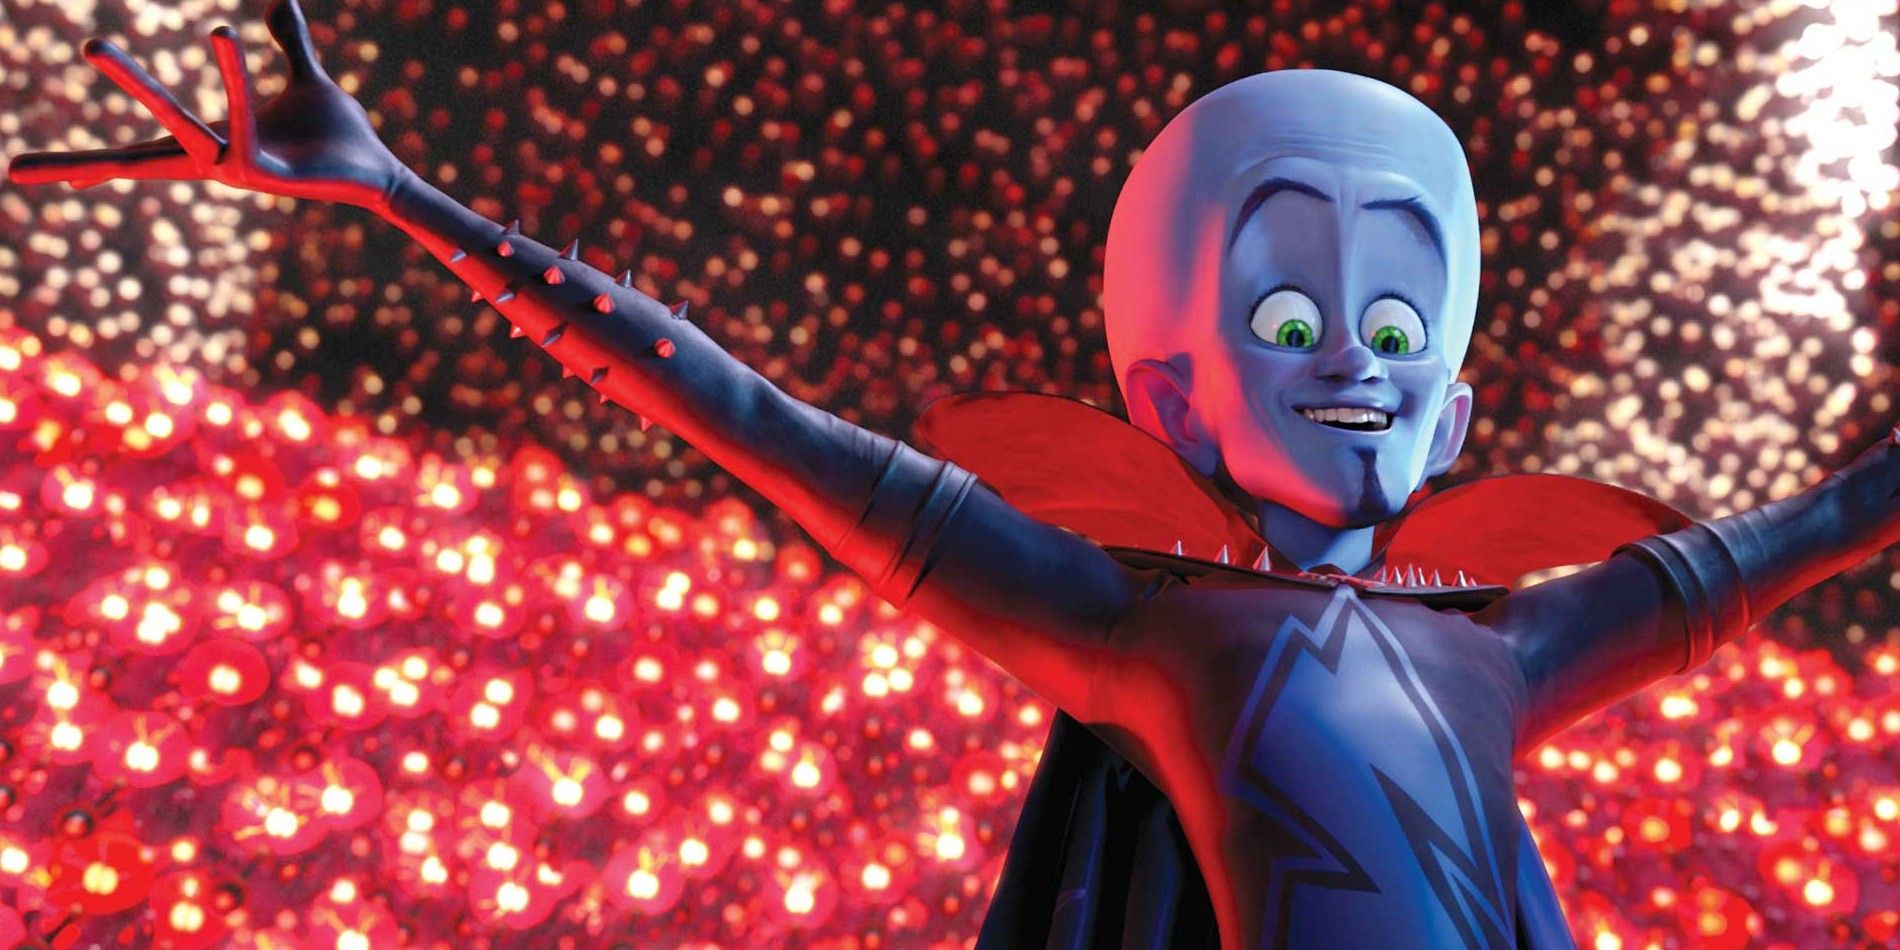 Megamind posing and smiling